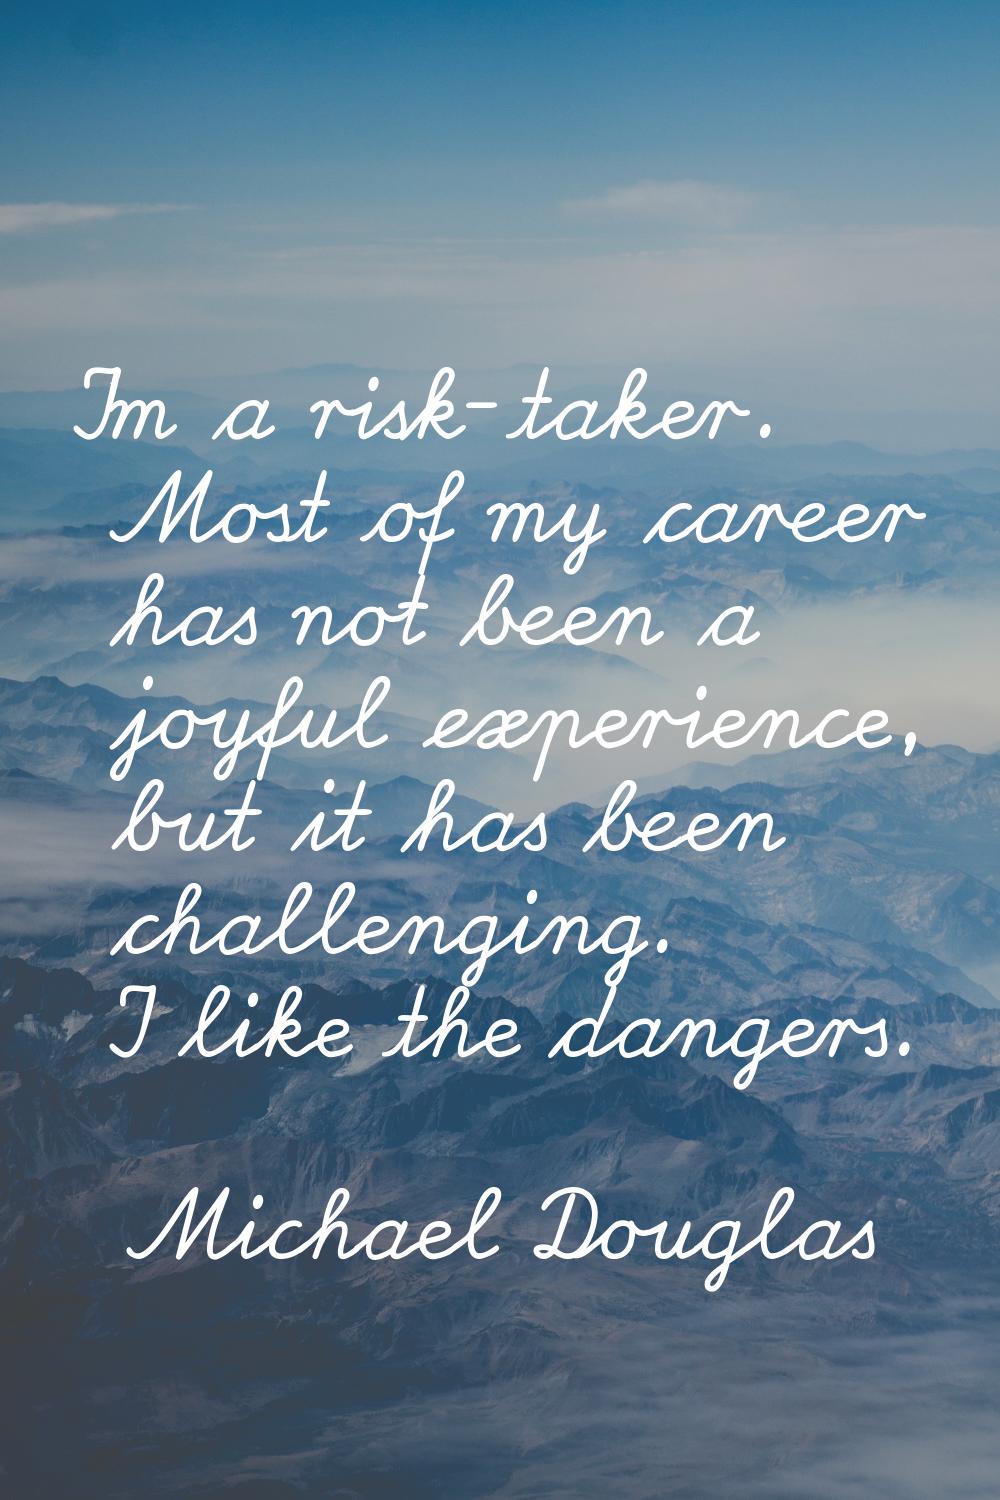 I'm a risk-taker. Most of my career has not been a joyful experience, but it has been challenging. 